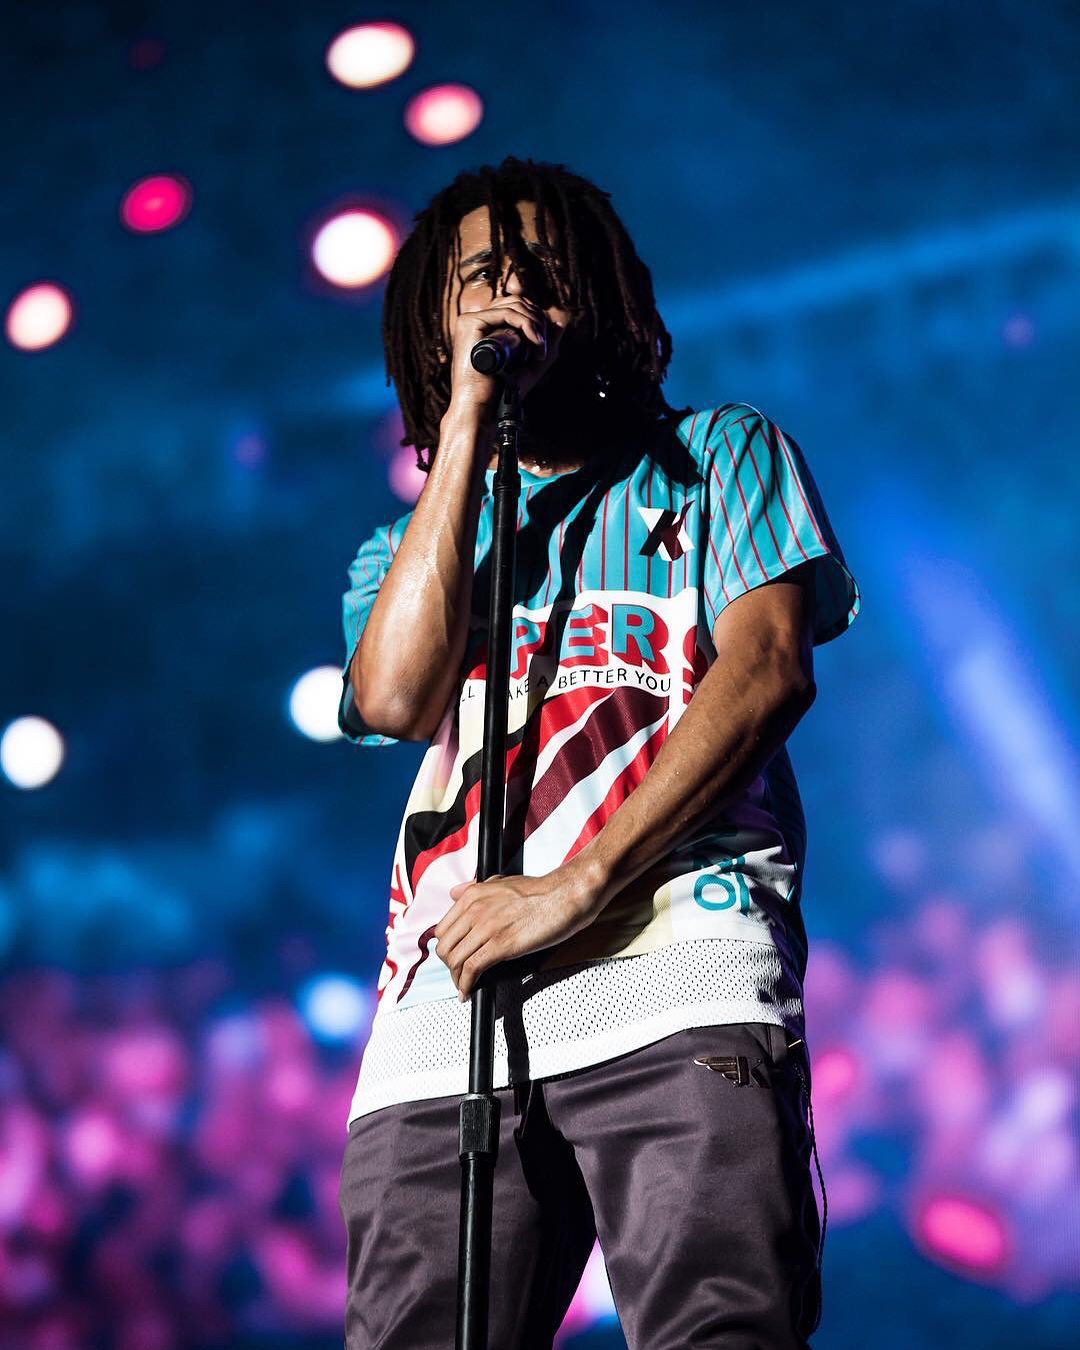 SPOTTED: J. Cole Performing in Miami Sporting Kenzo